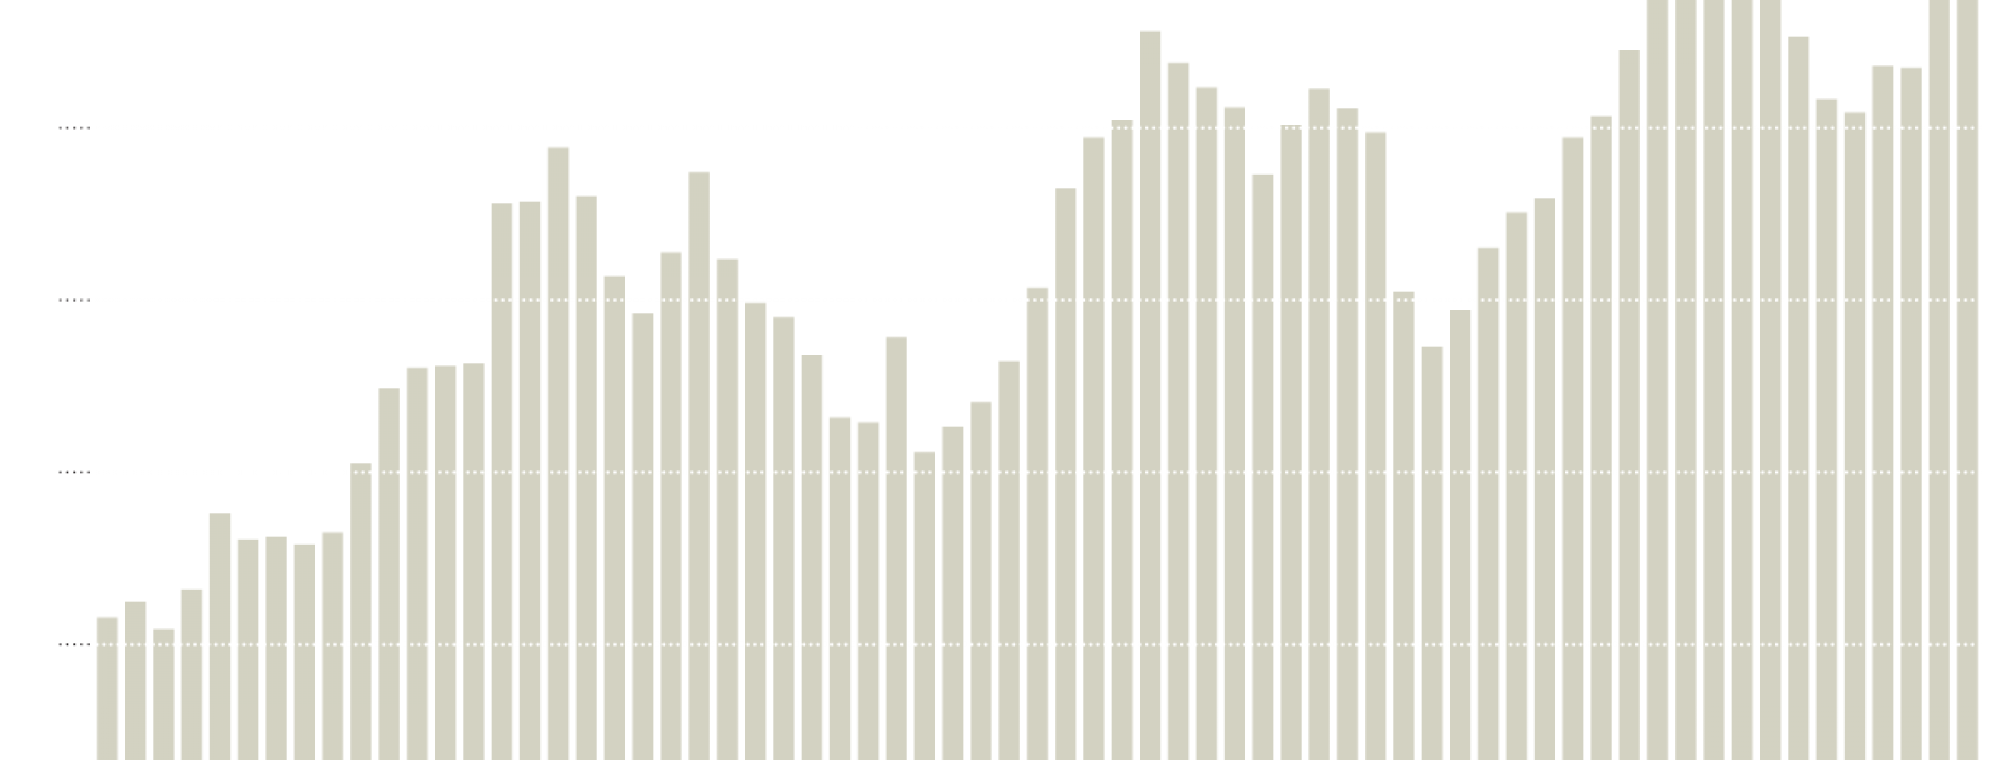 Annual spending by the Department of Energy and the Atomic Energy Commission on nuclear weapons research, development, testing and production.